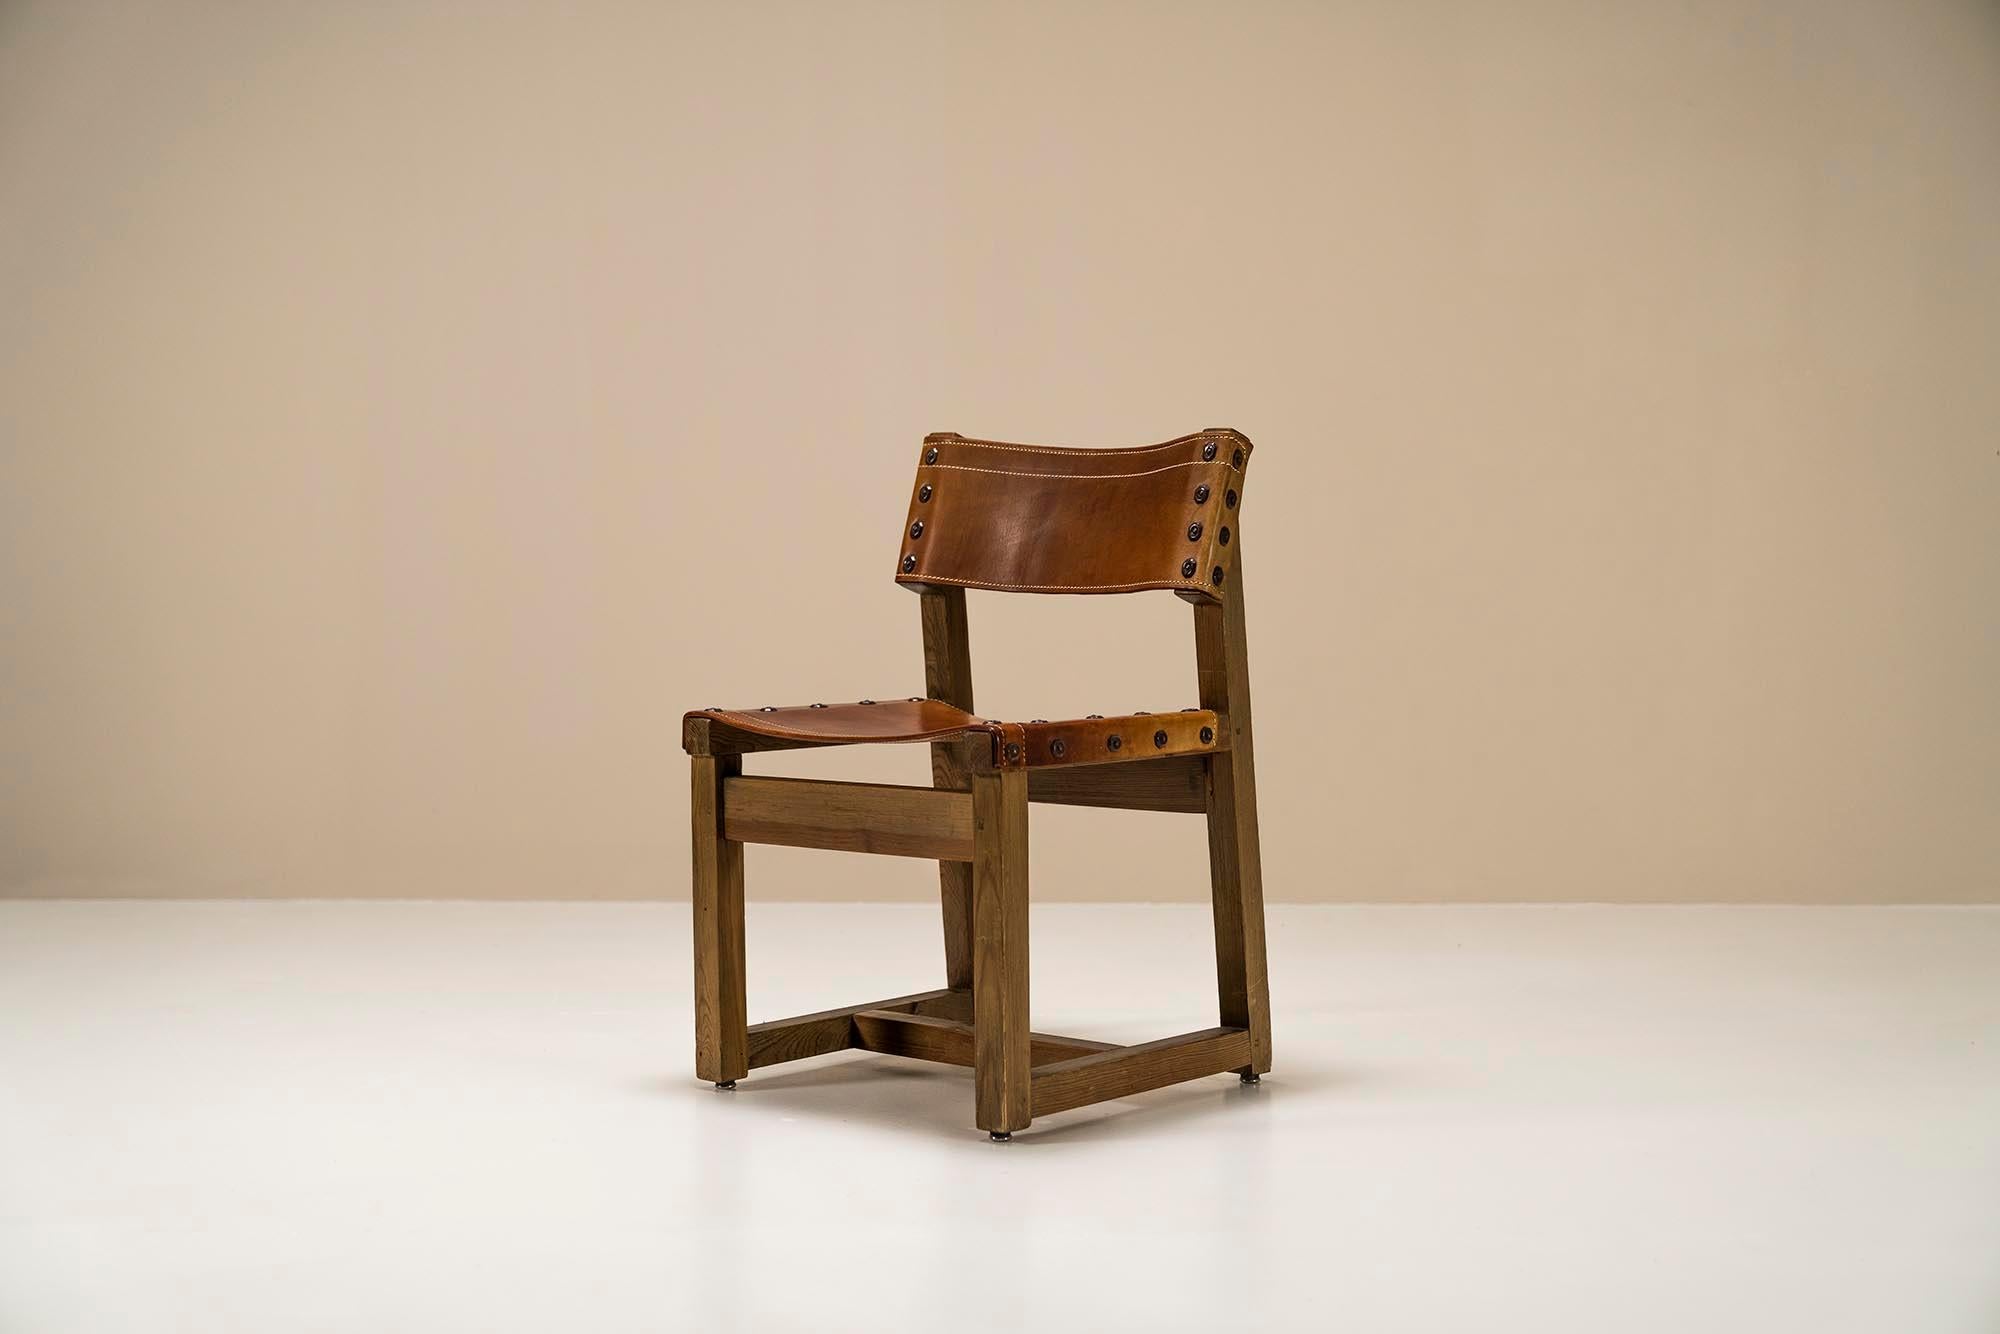 Mid-20th Century Biosca Set of 4 Chairs in Pine and Cognac Saddle Leather, Spain, 1960s For Sale